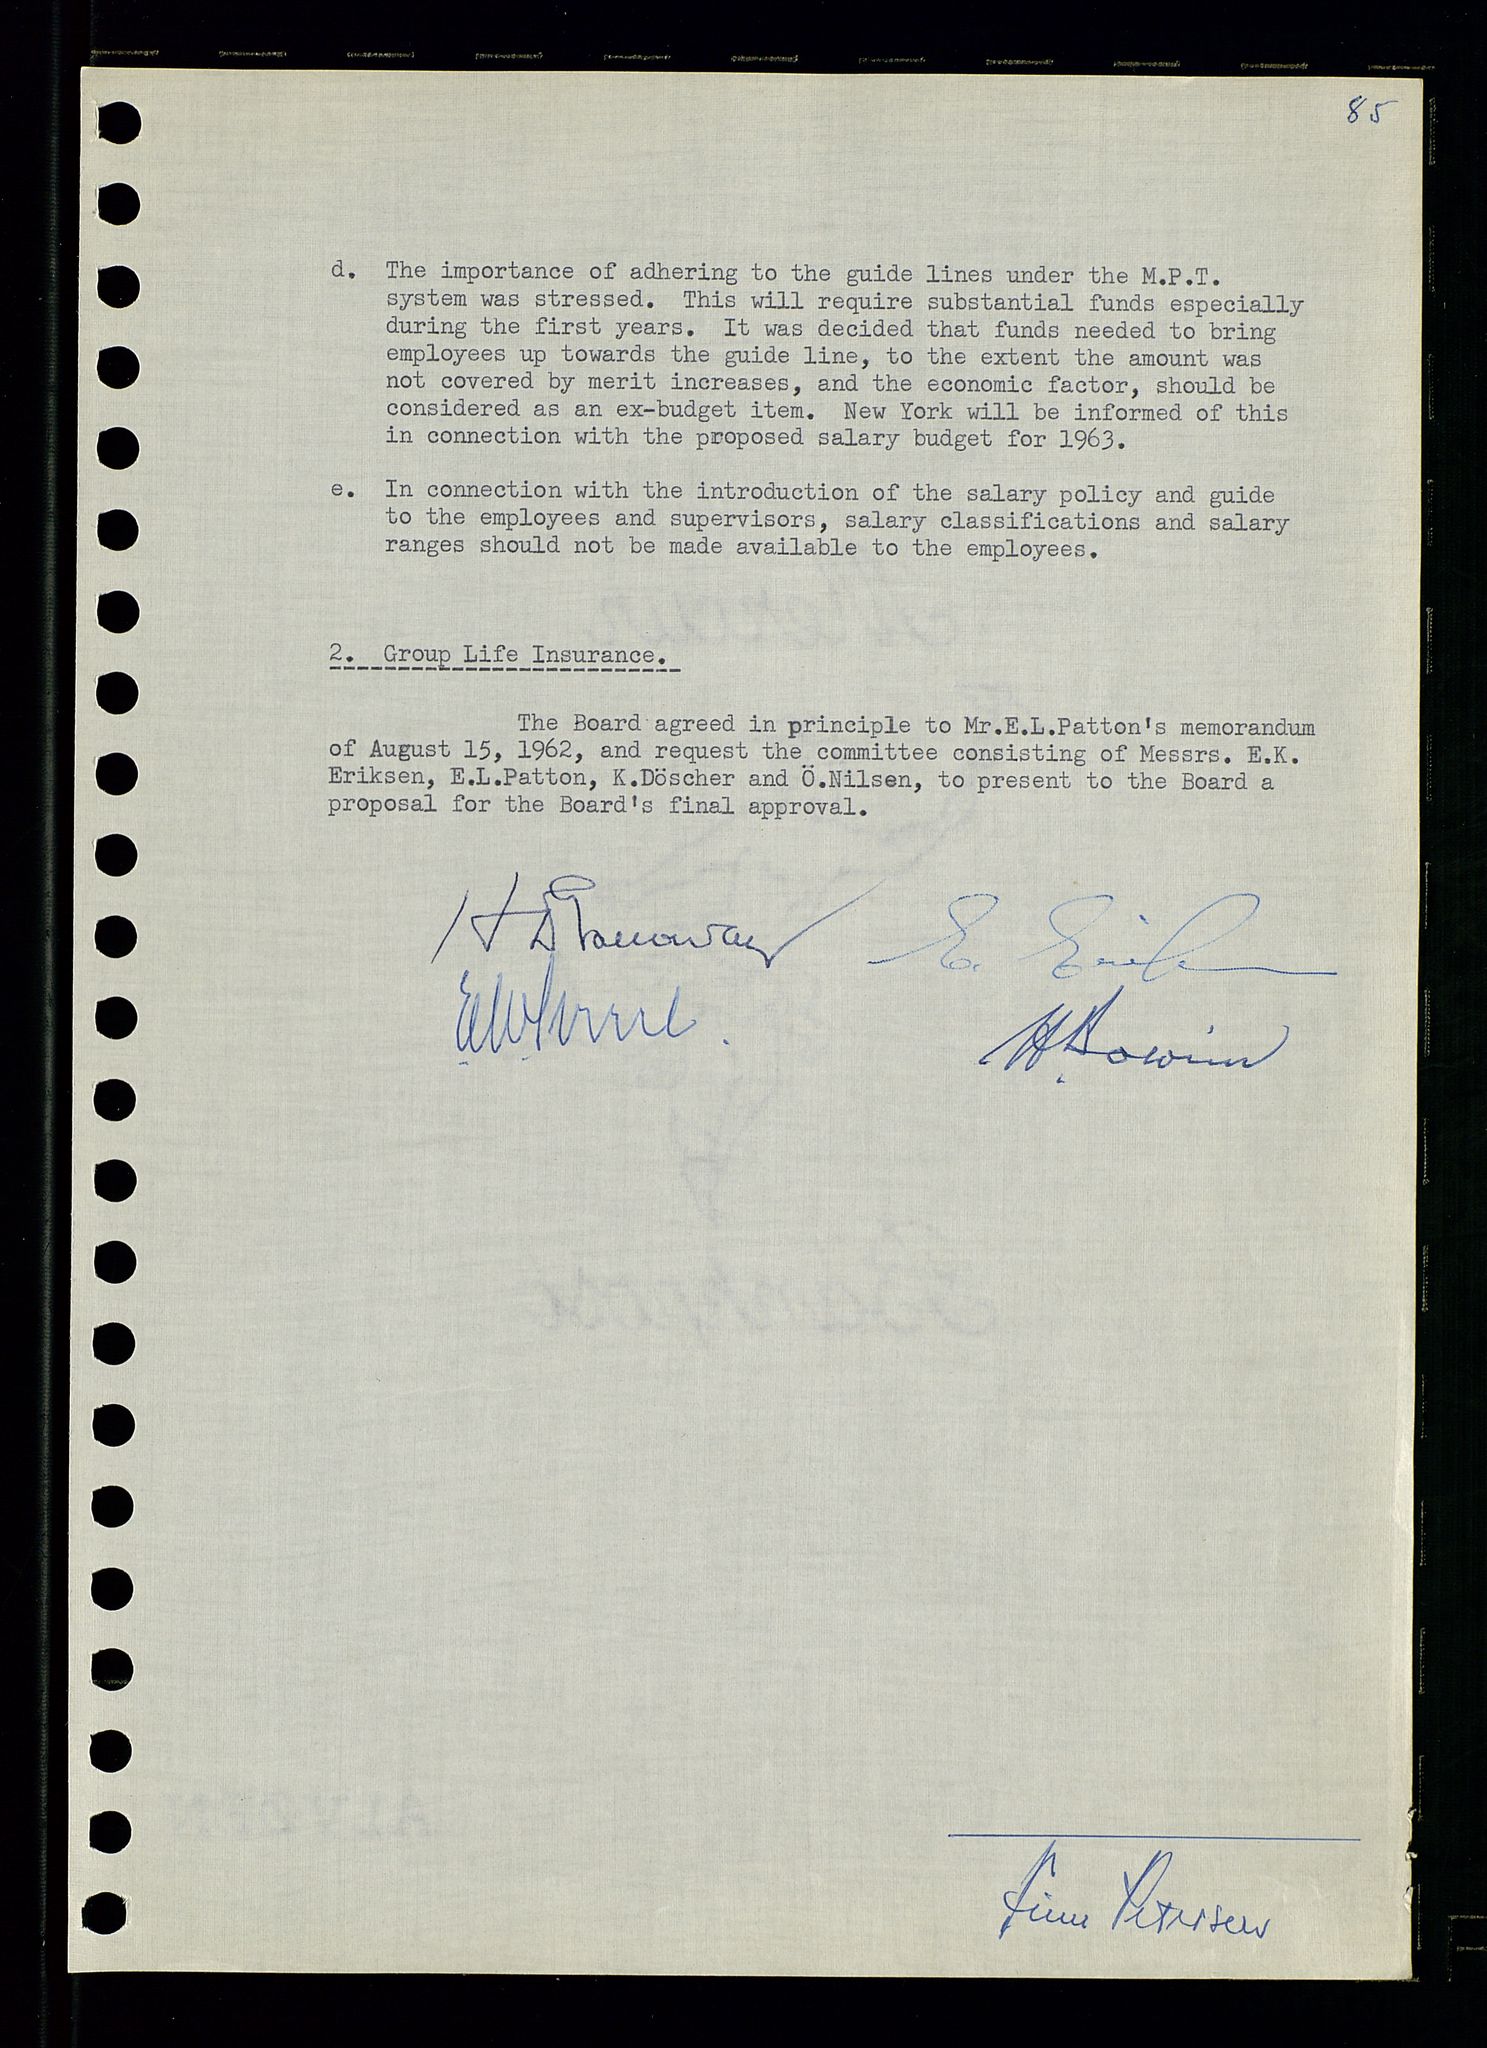 Pa 0982 - Esso Norge A/S, SAST/A-100448/A/Aa/L0001/0003: Den administrerende direksjon Board minutes (styrereferater) / Den administrerende direksjon Board minutes (styrereferater), 1962, s. 85